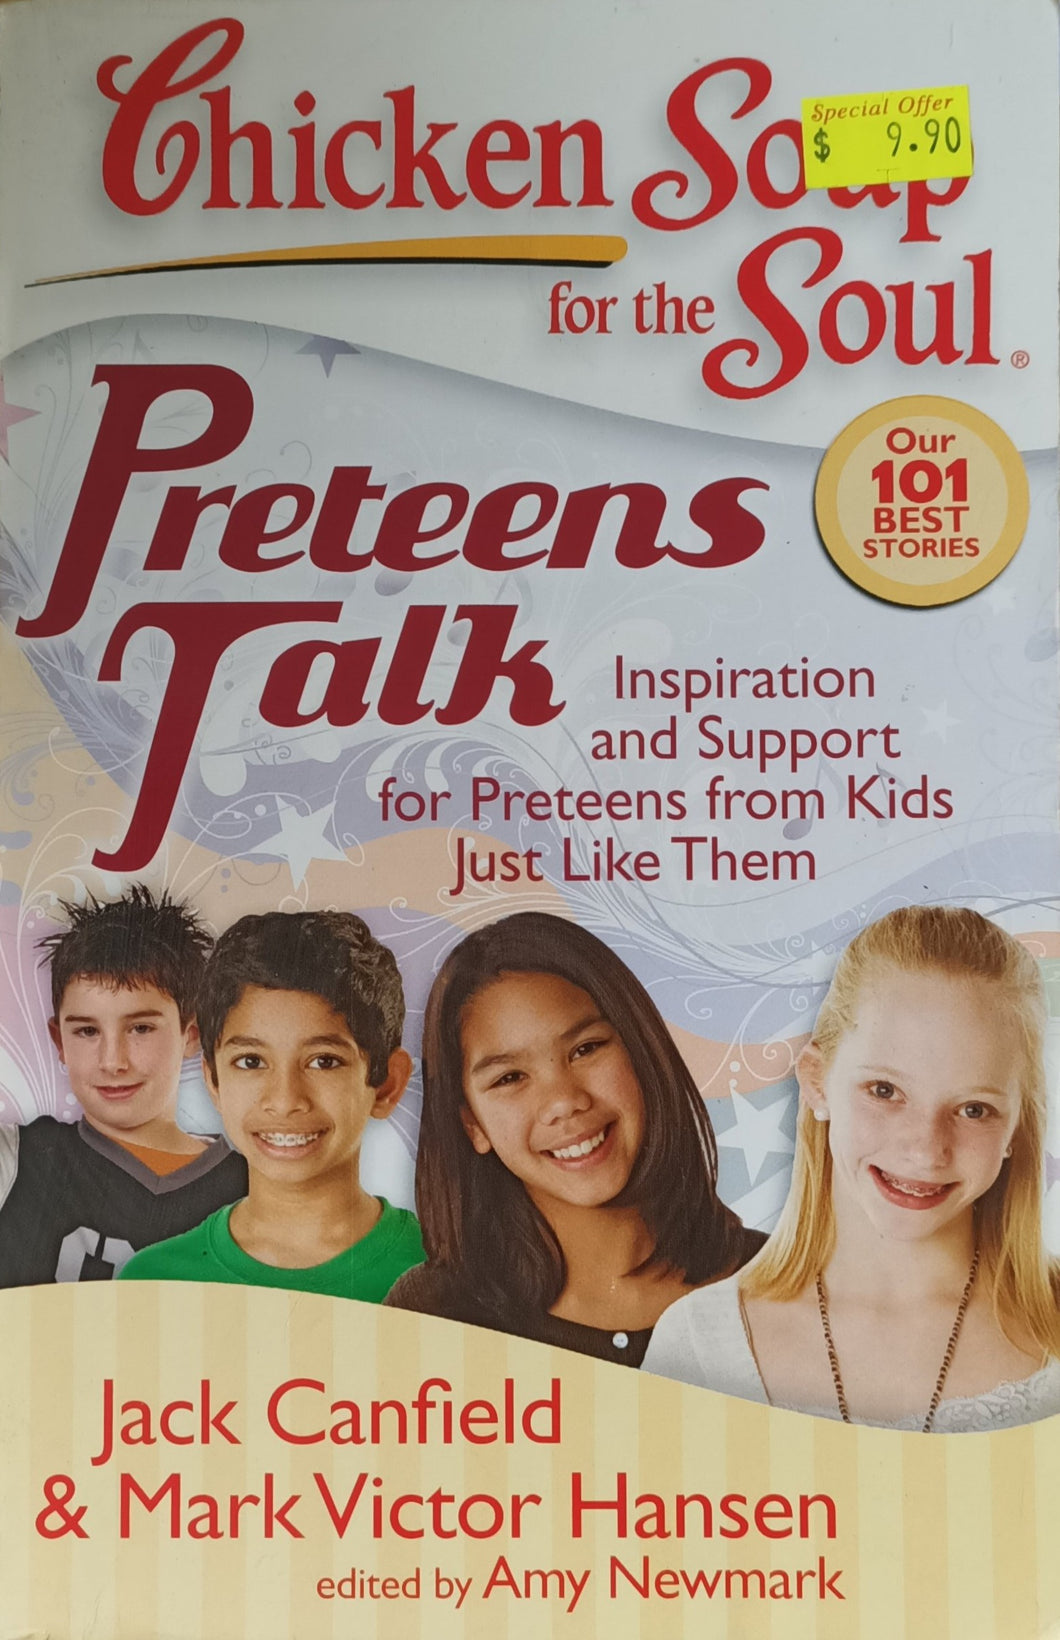 Chicken Soup for the Soul: Preteens Talk - Jack Canfield, Mark Victor Hansen, Amy Newmark